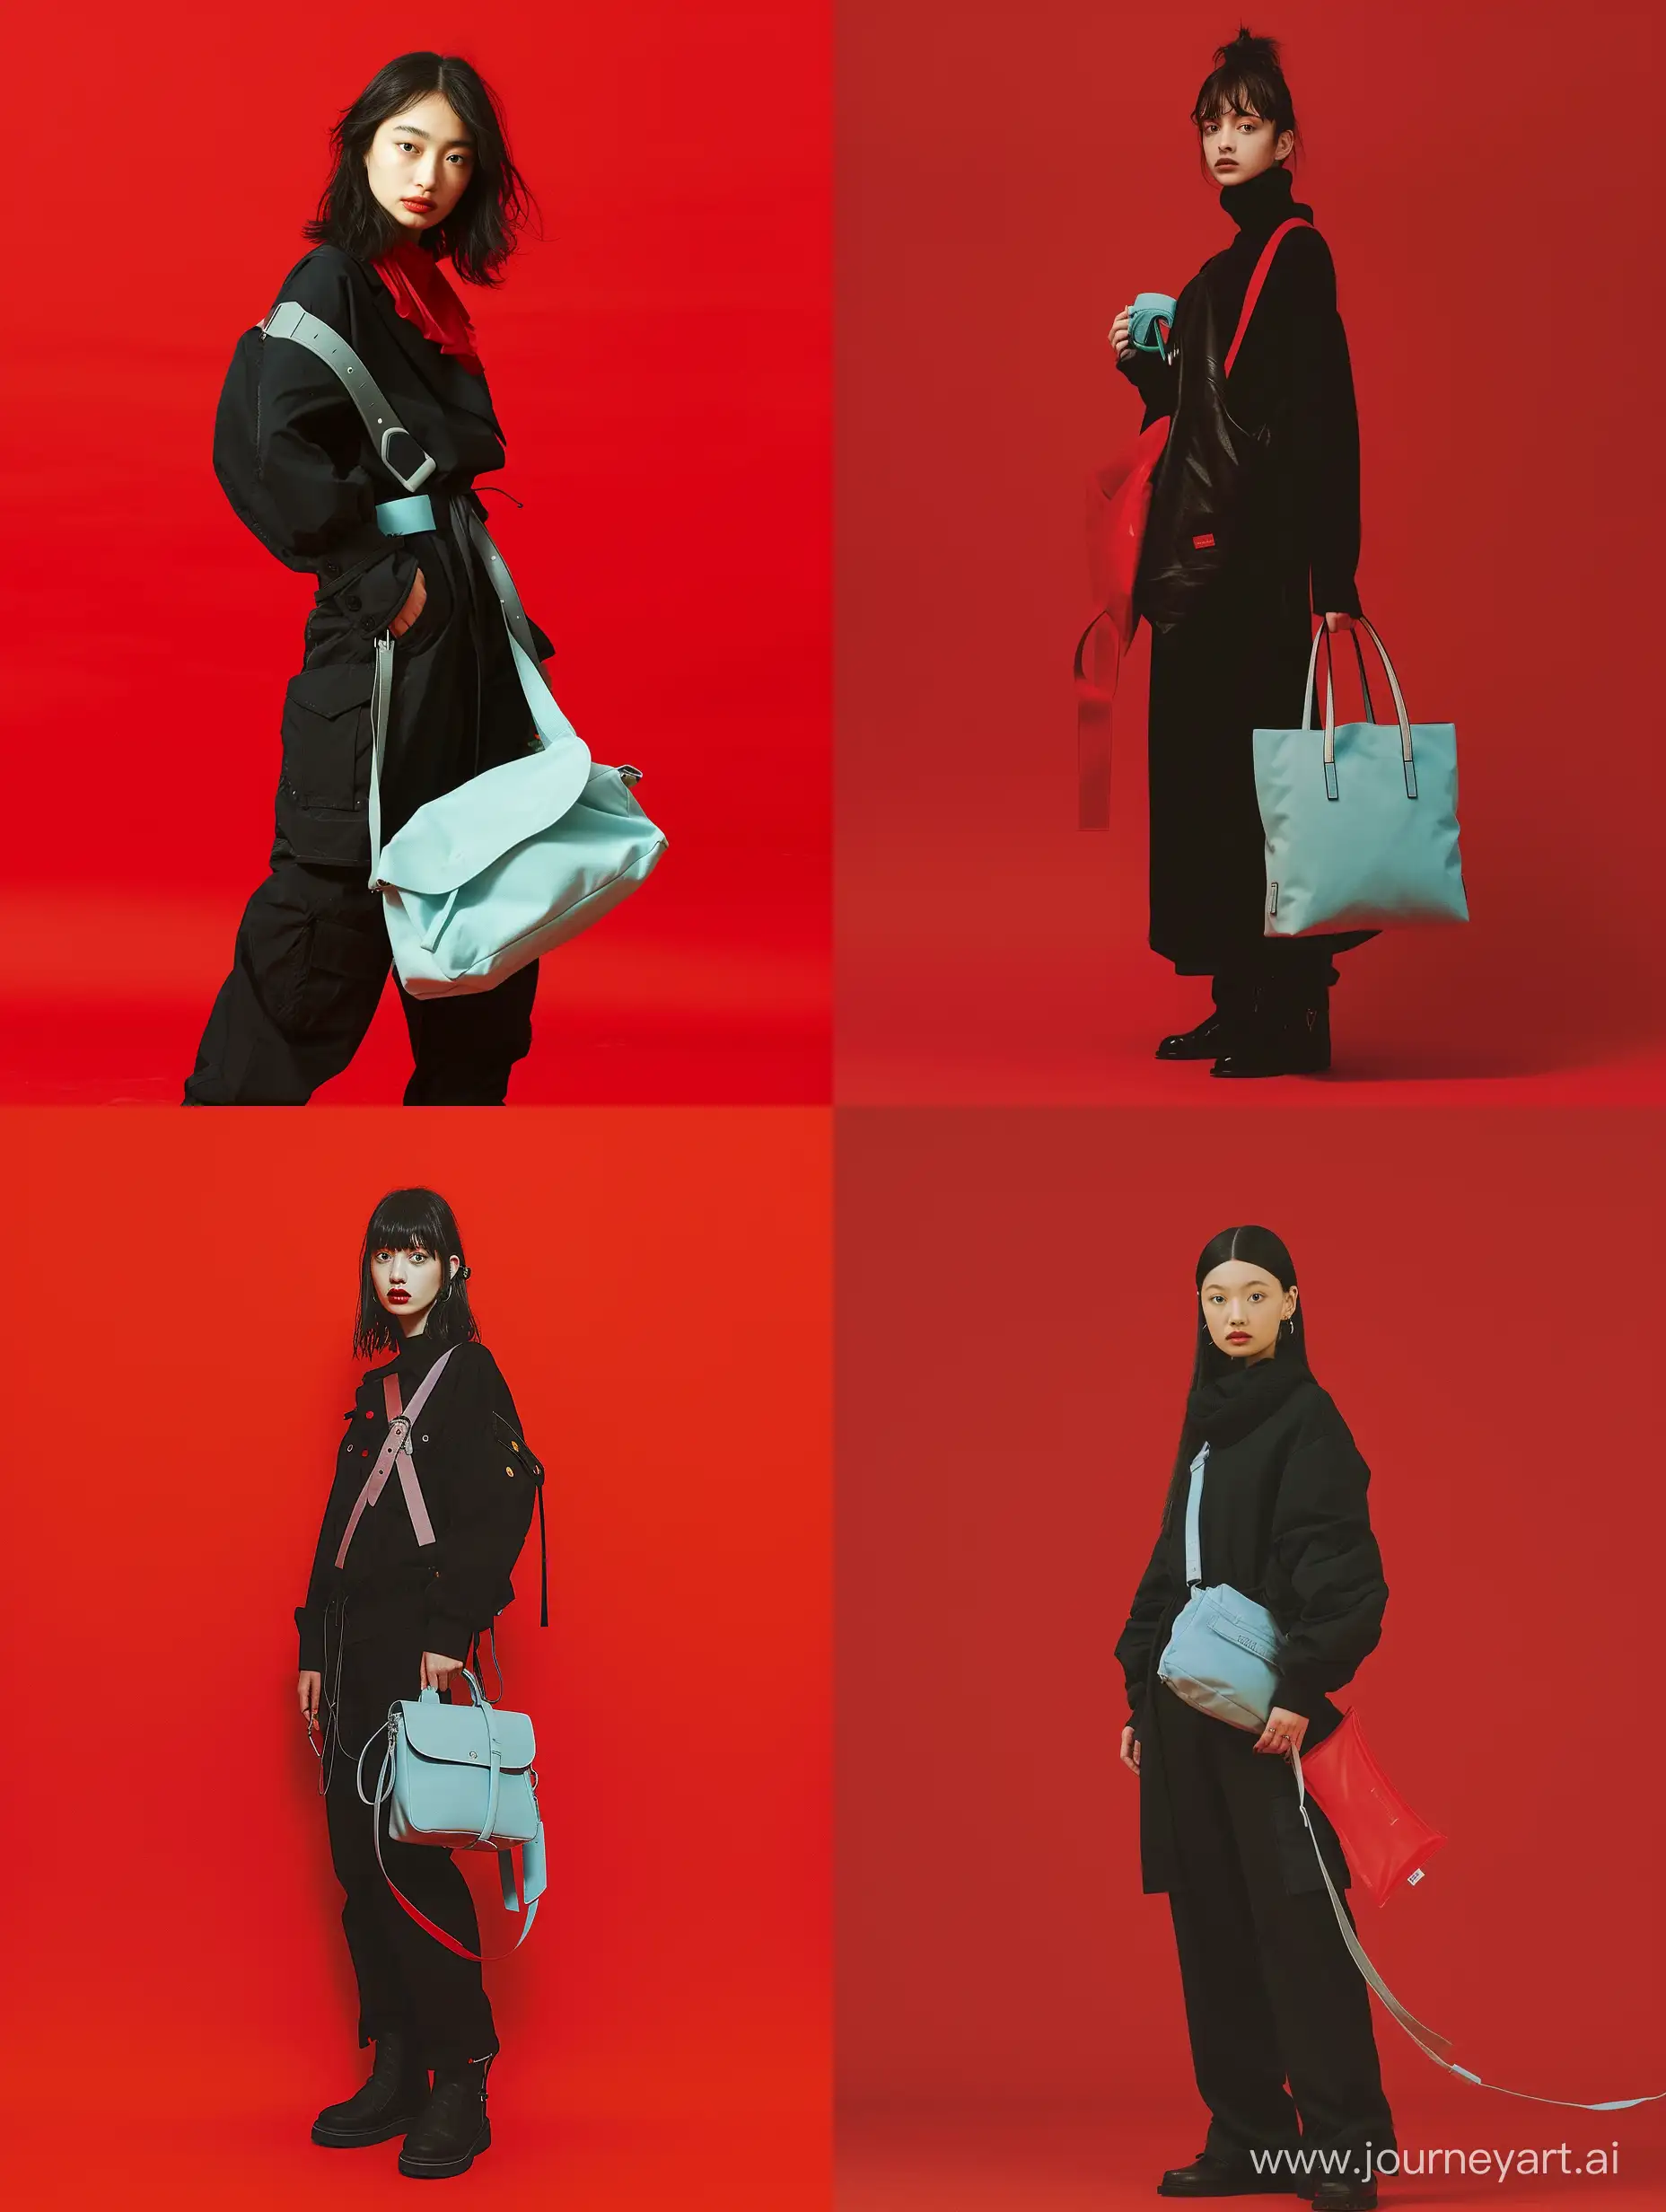 a fashion photo of a girl wearing a black outfit and holding a light blue bag, the background is red, creating a contrast with the clothes and accessories, the image may be from a magazine or a website related to fashion or style